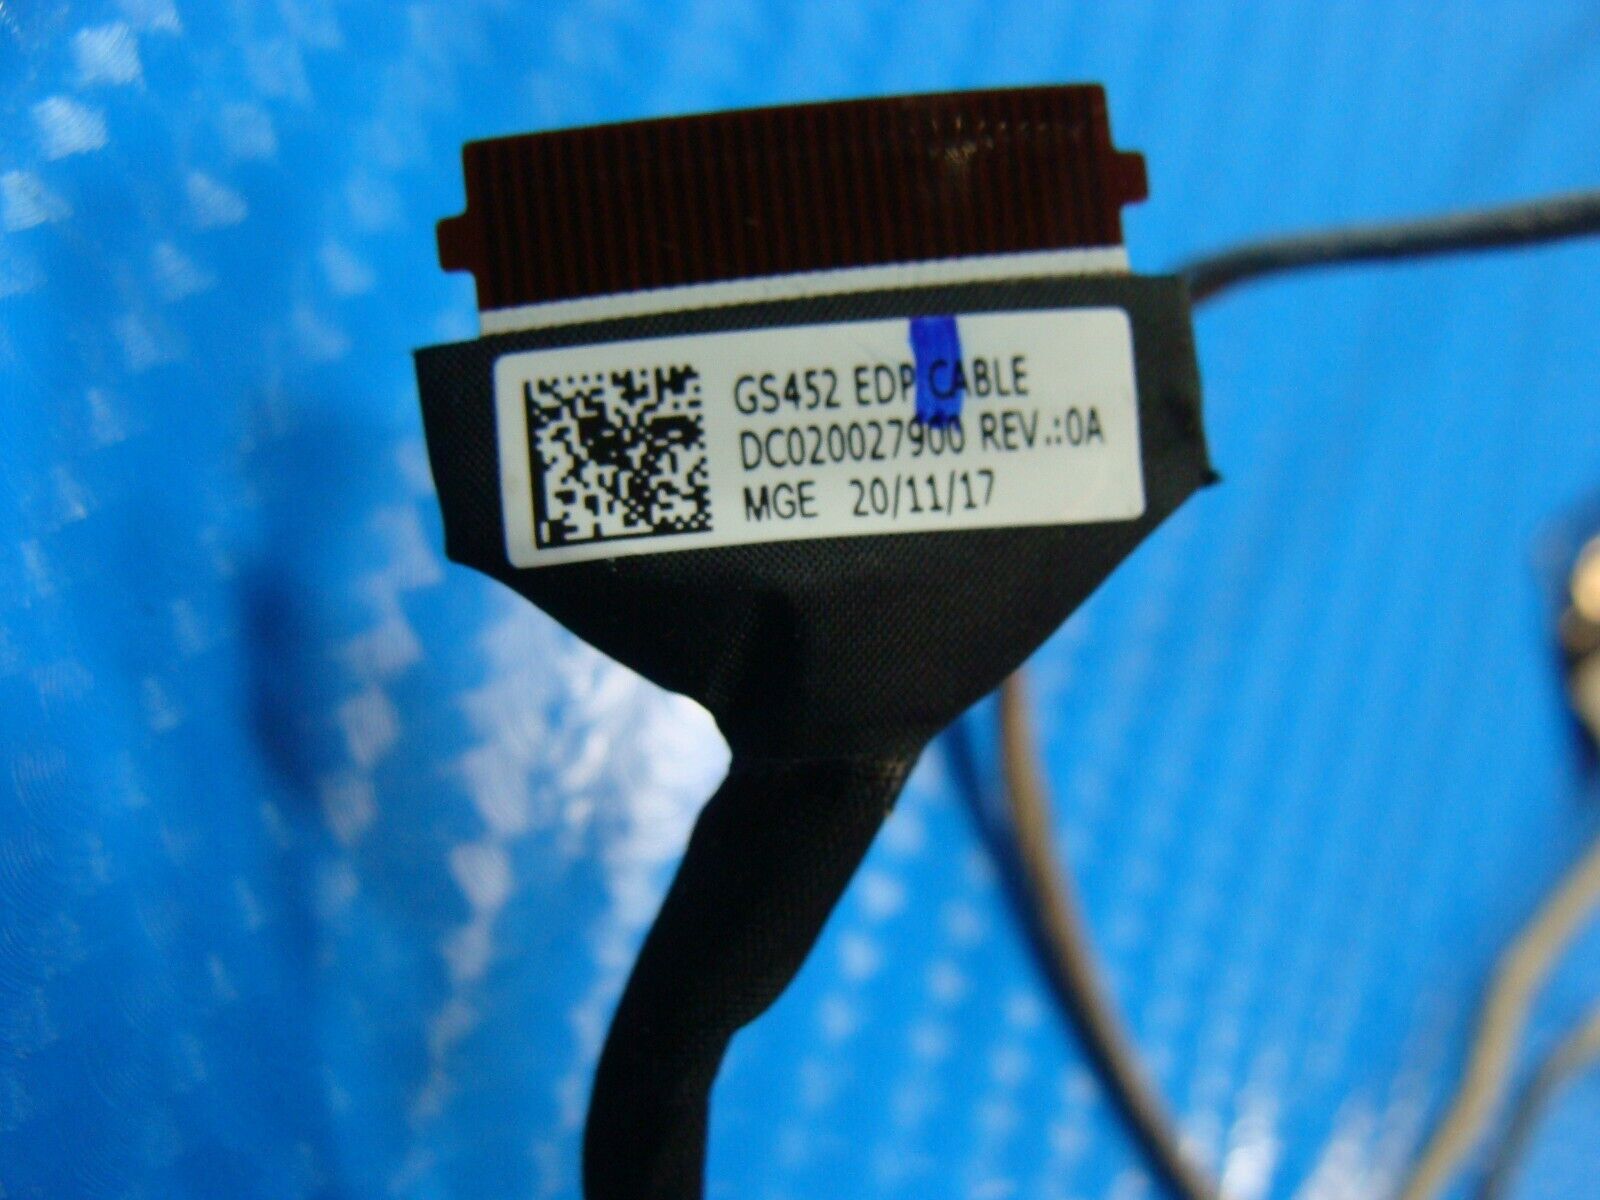 Lenovo IdeaPad 14” 3 14IIL05 81WD Genuine Laptop LCD Video Cable DC020027900